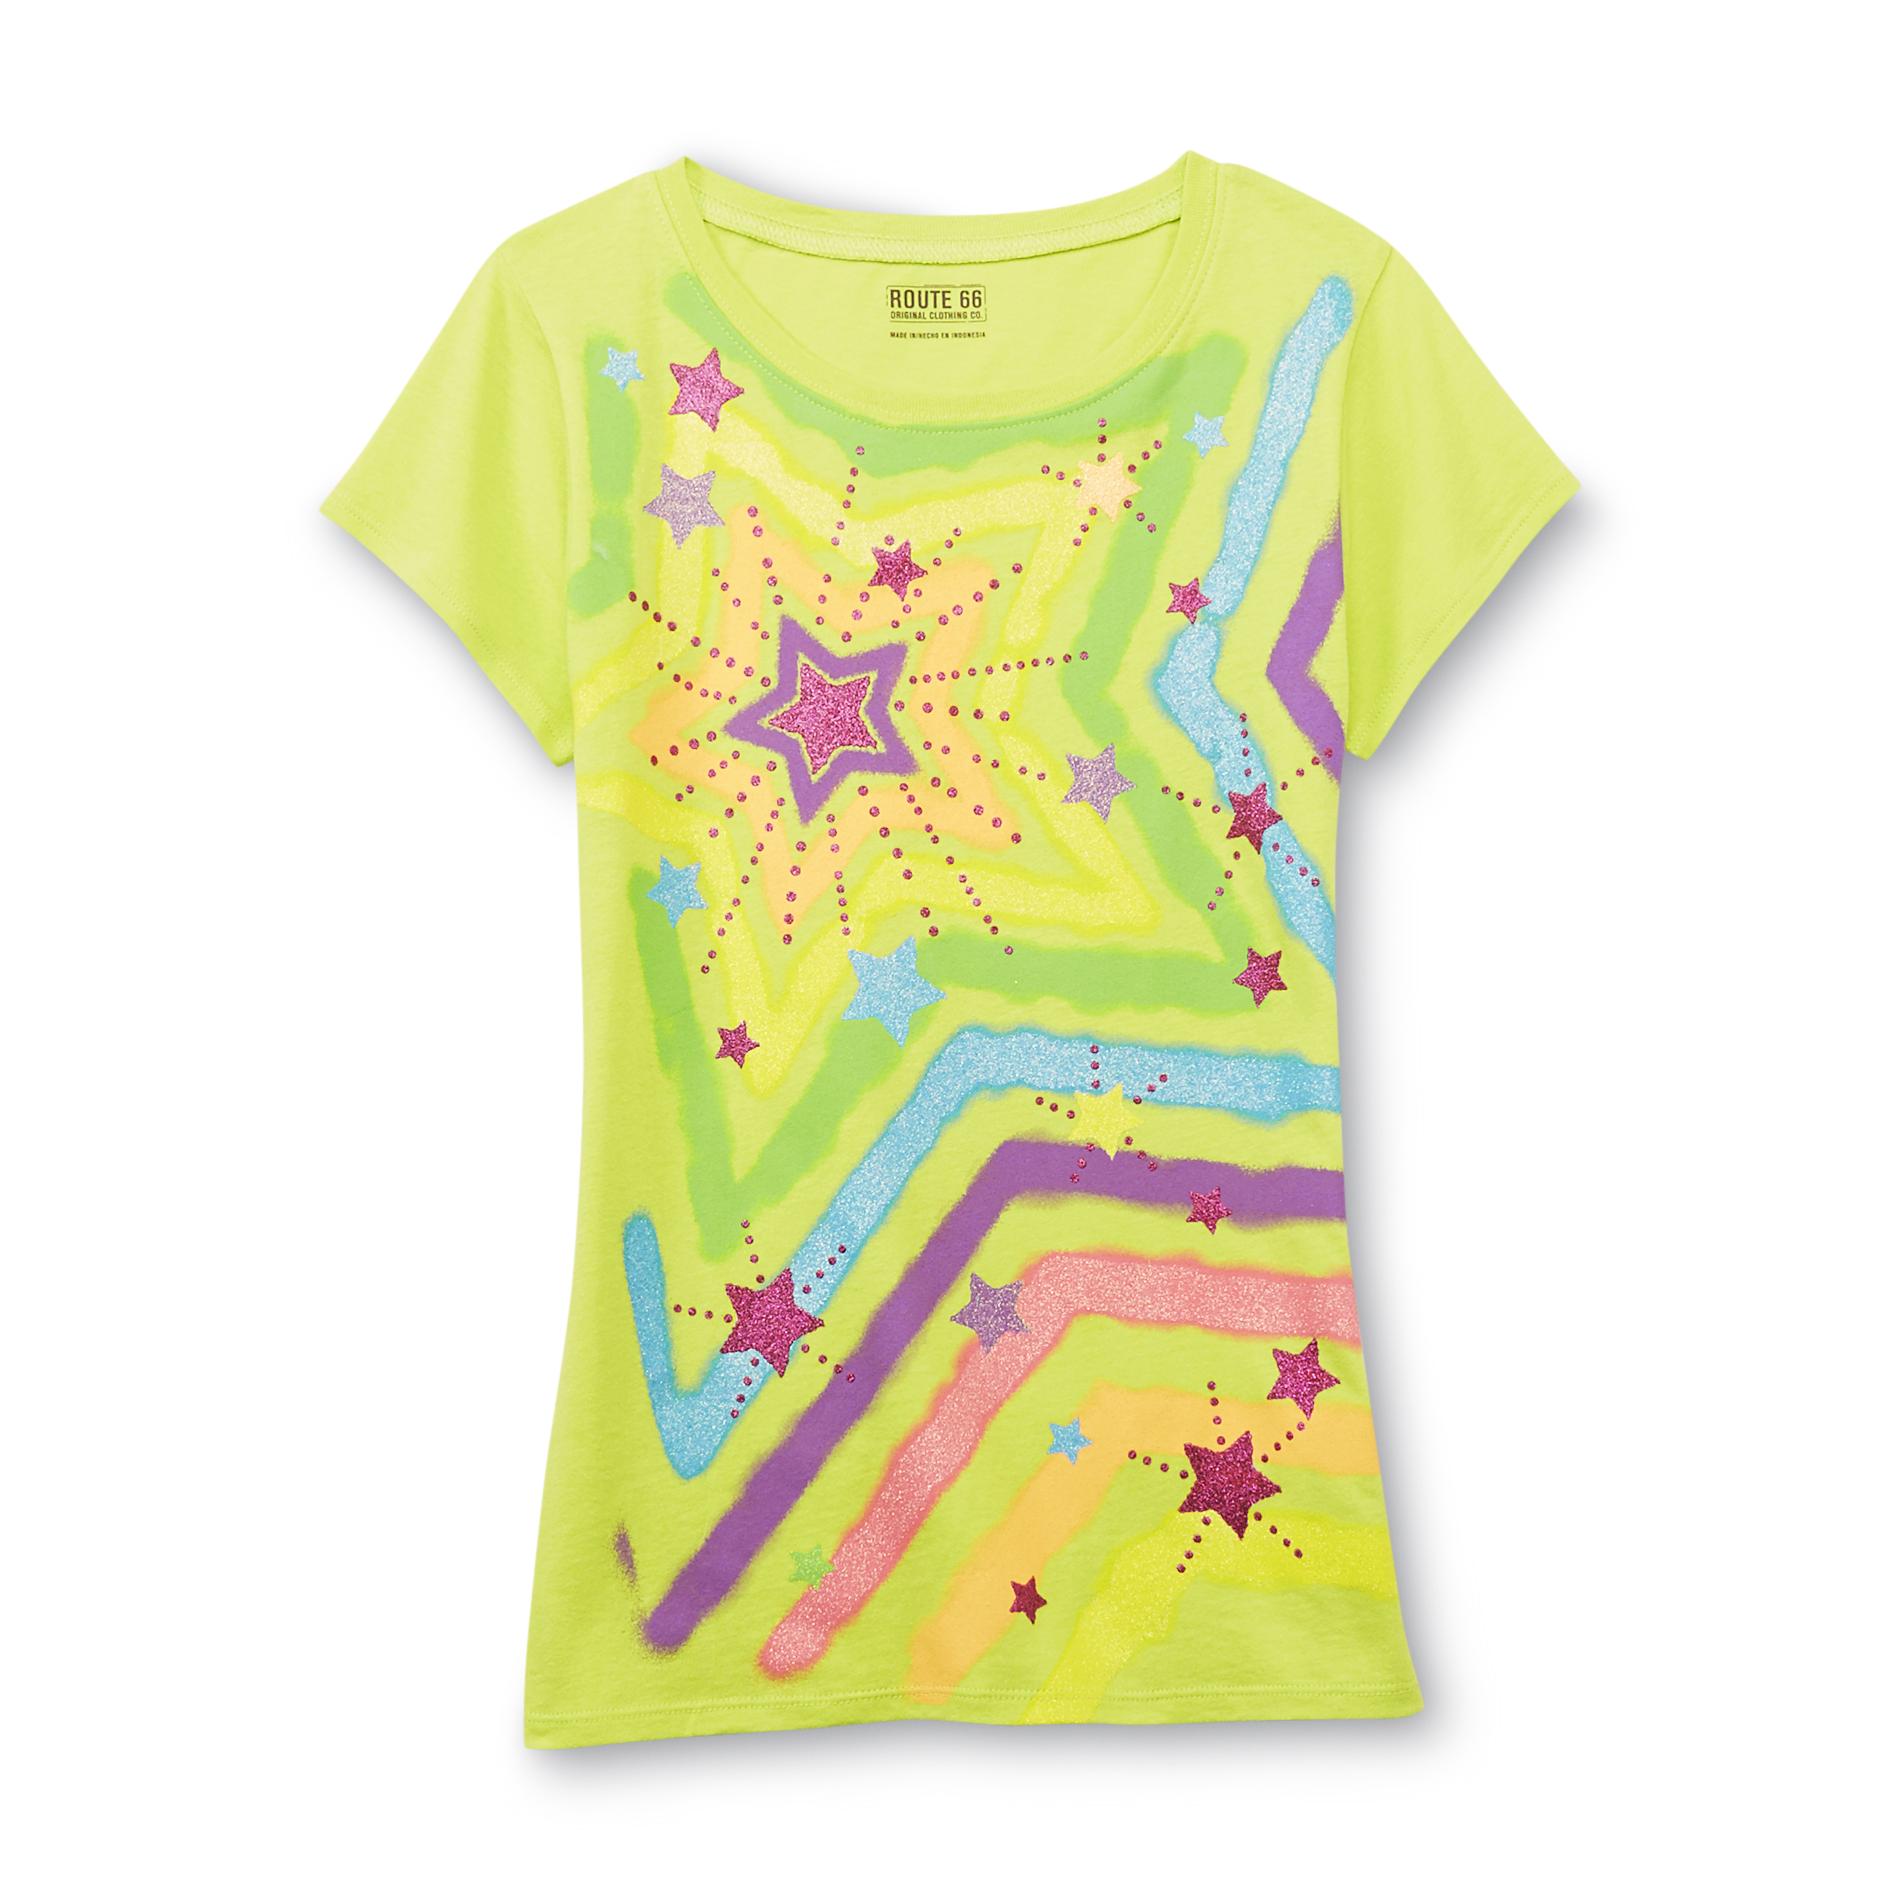 Route 66 Girl's Graphic T-Shirt - Star